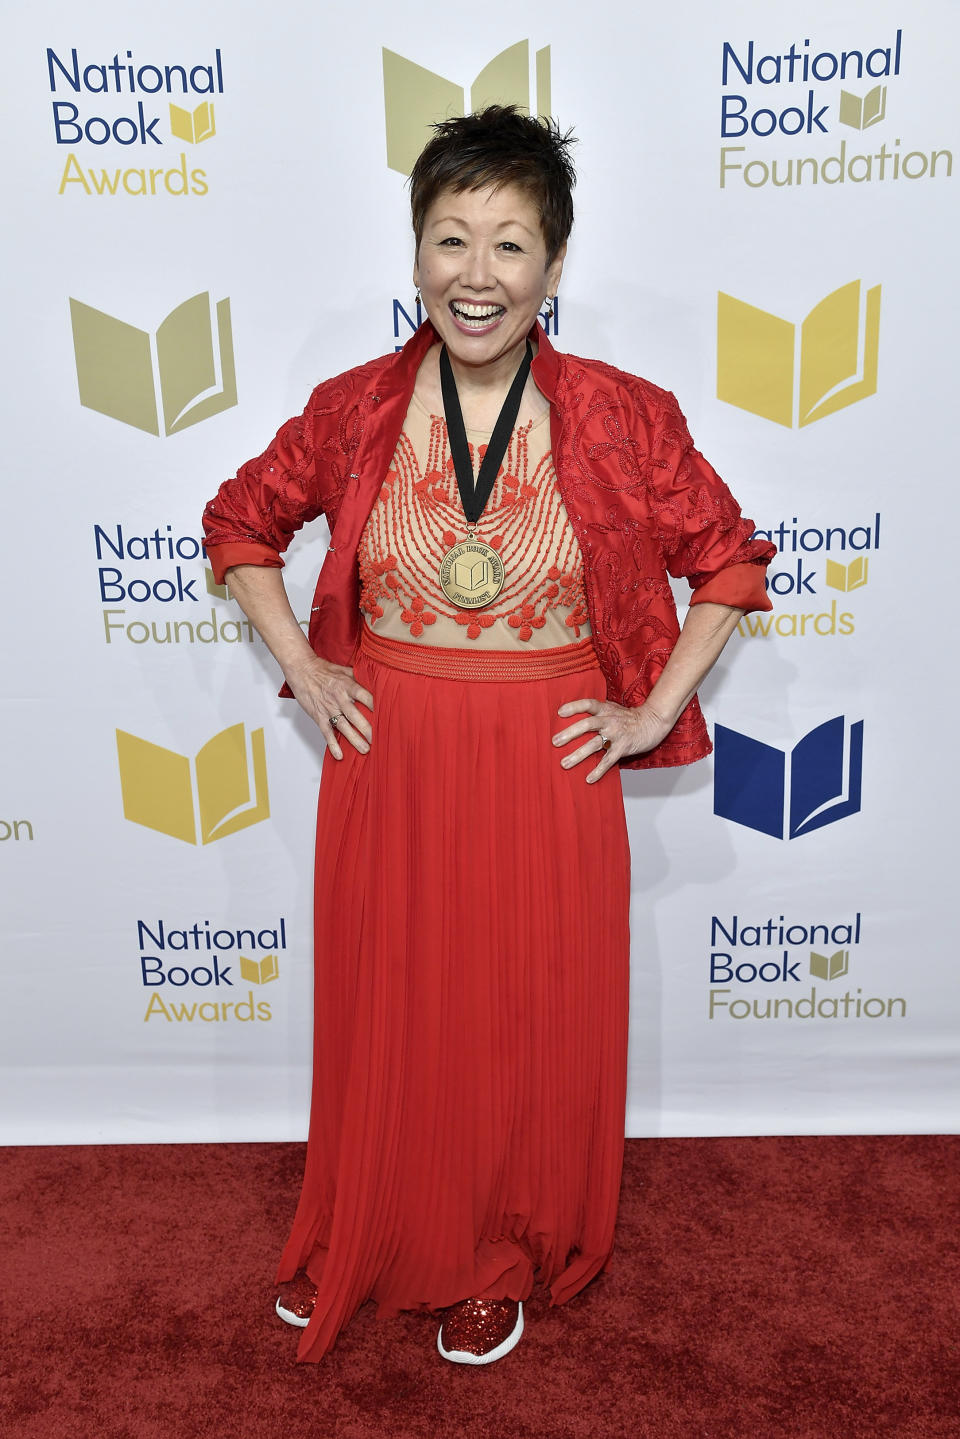 Young People's Literature finalist Lisa Yee attends the 73rd National Book Awards, at Cipriani Wall Street on Wednesday, Nov. 16, 2022, in New York. (Photo by Evan Agostini/Invision/AP)